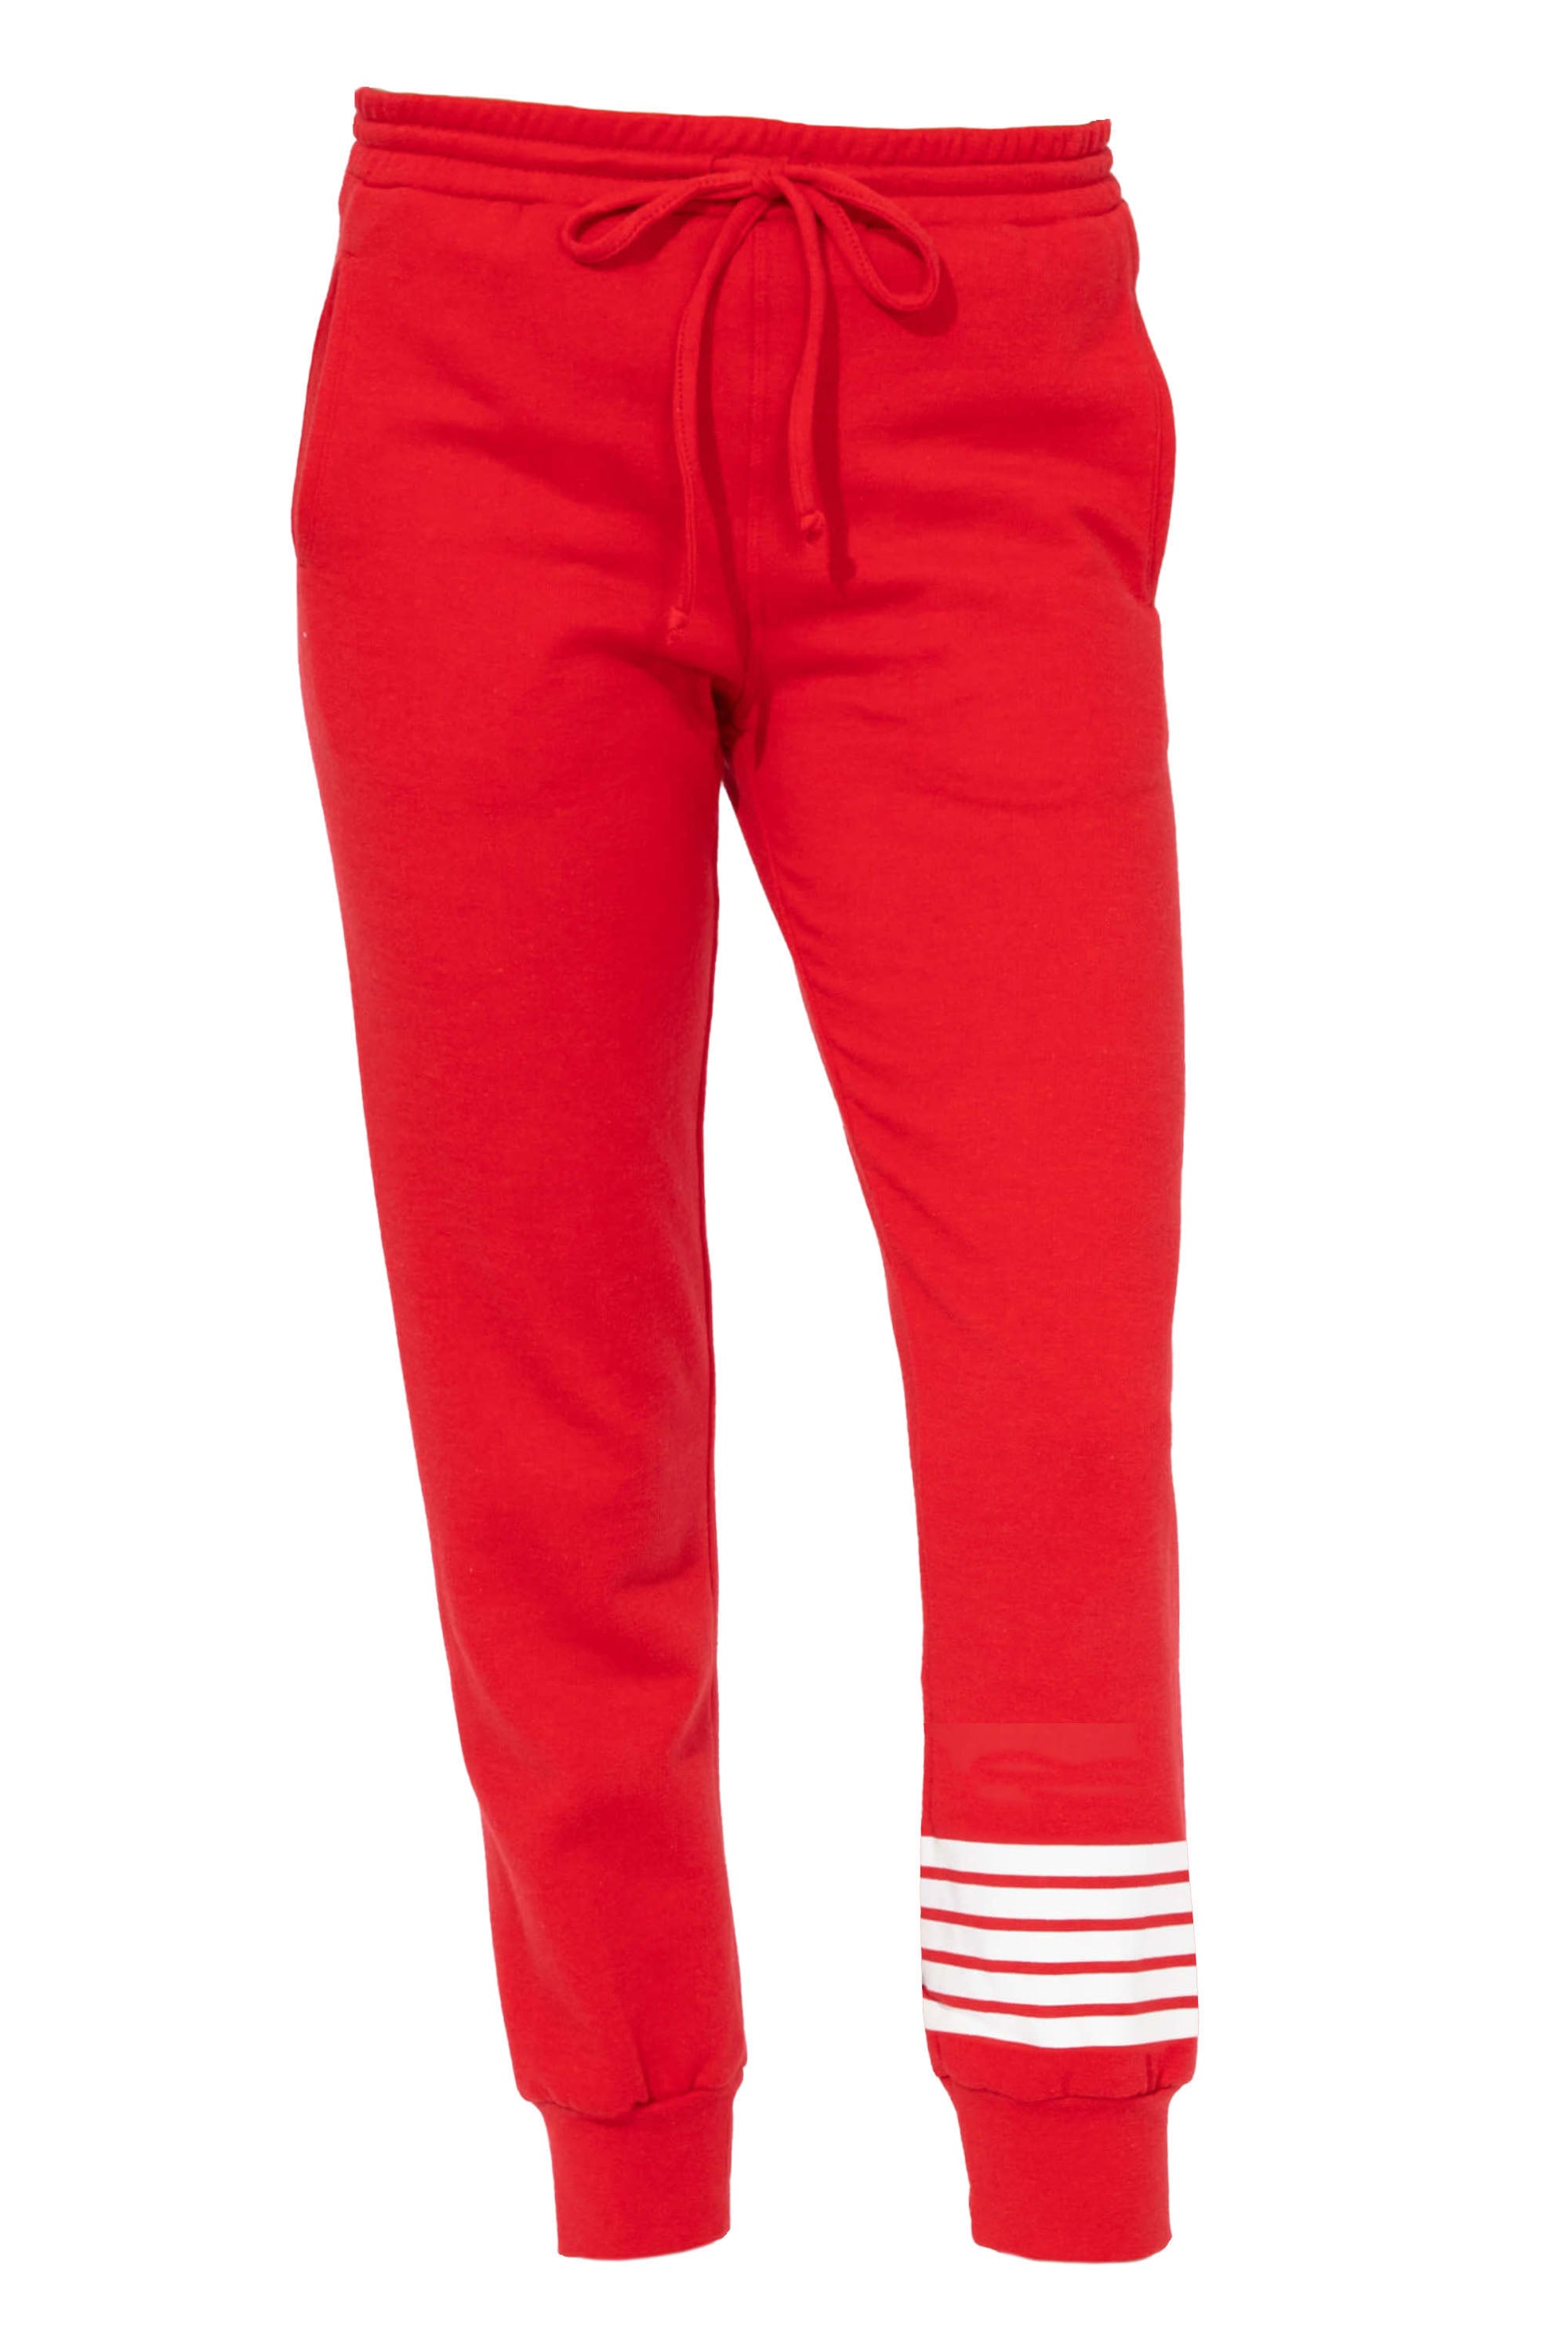 FITTED STRIPE JOGGER - CHERRY